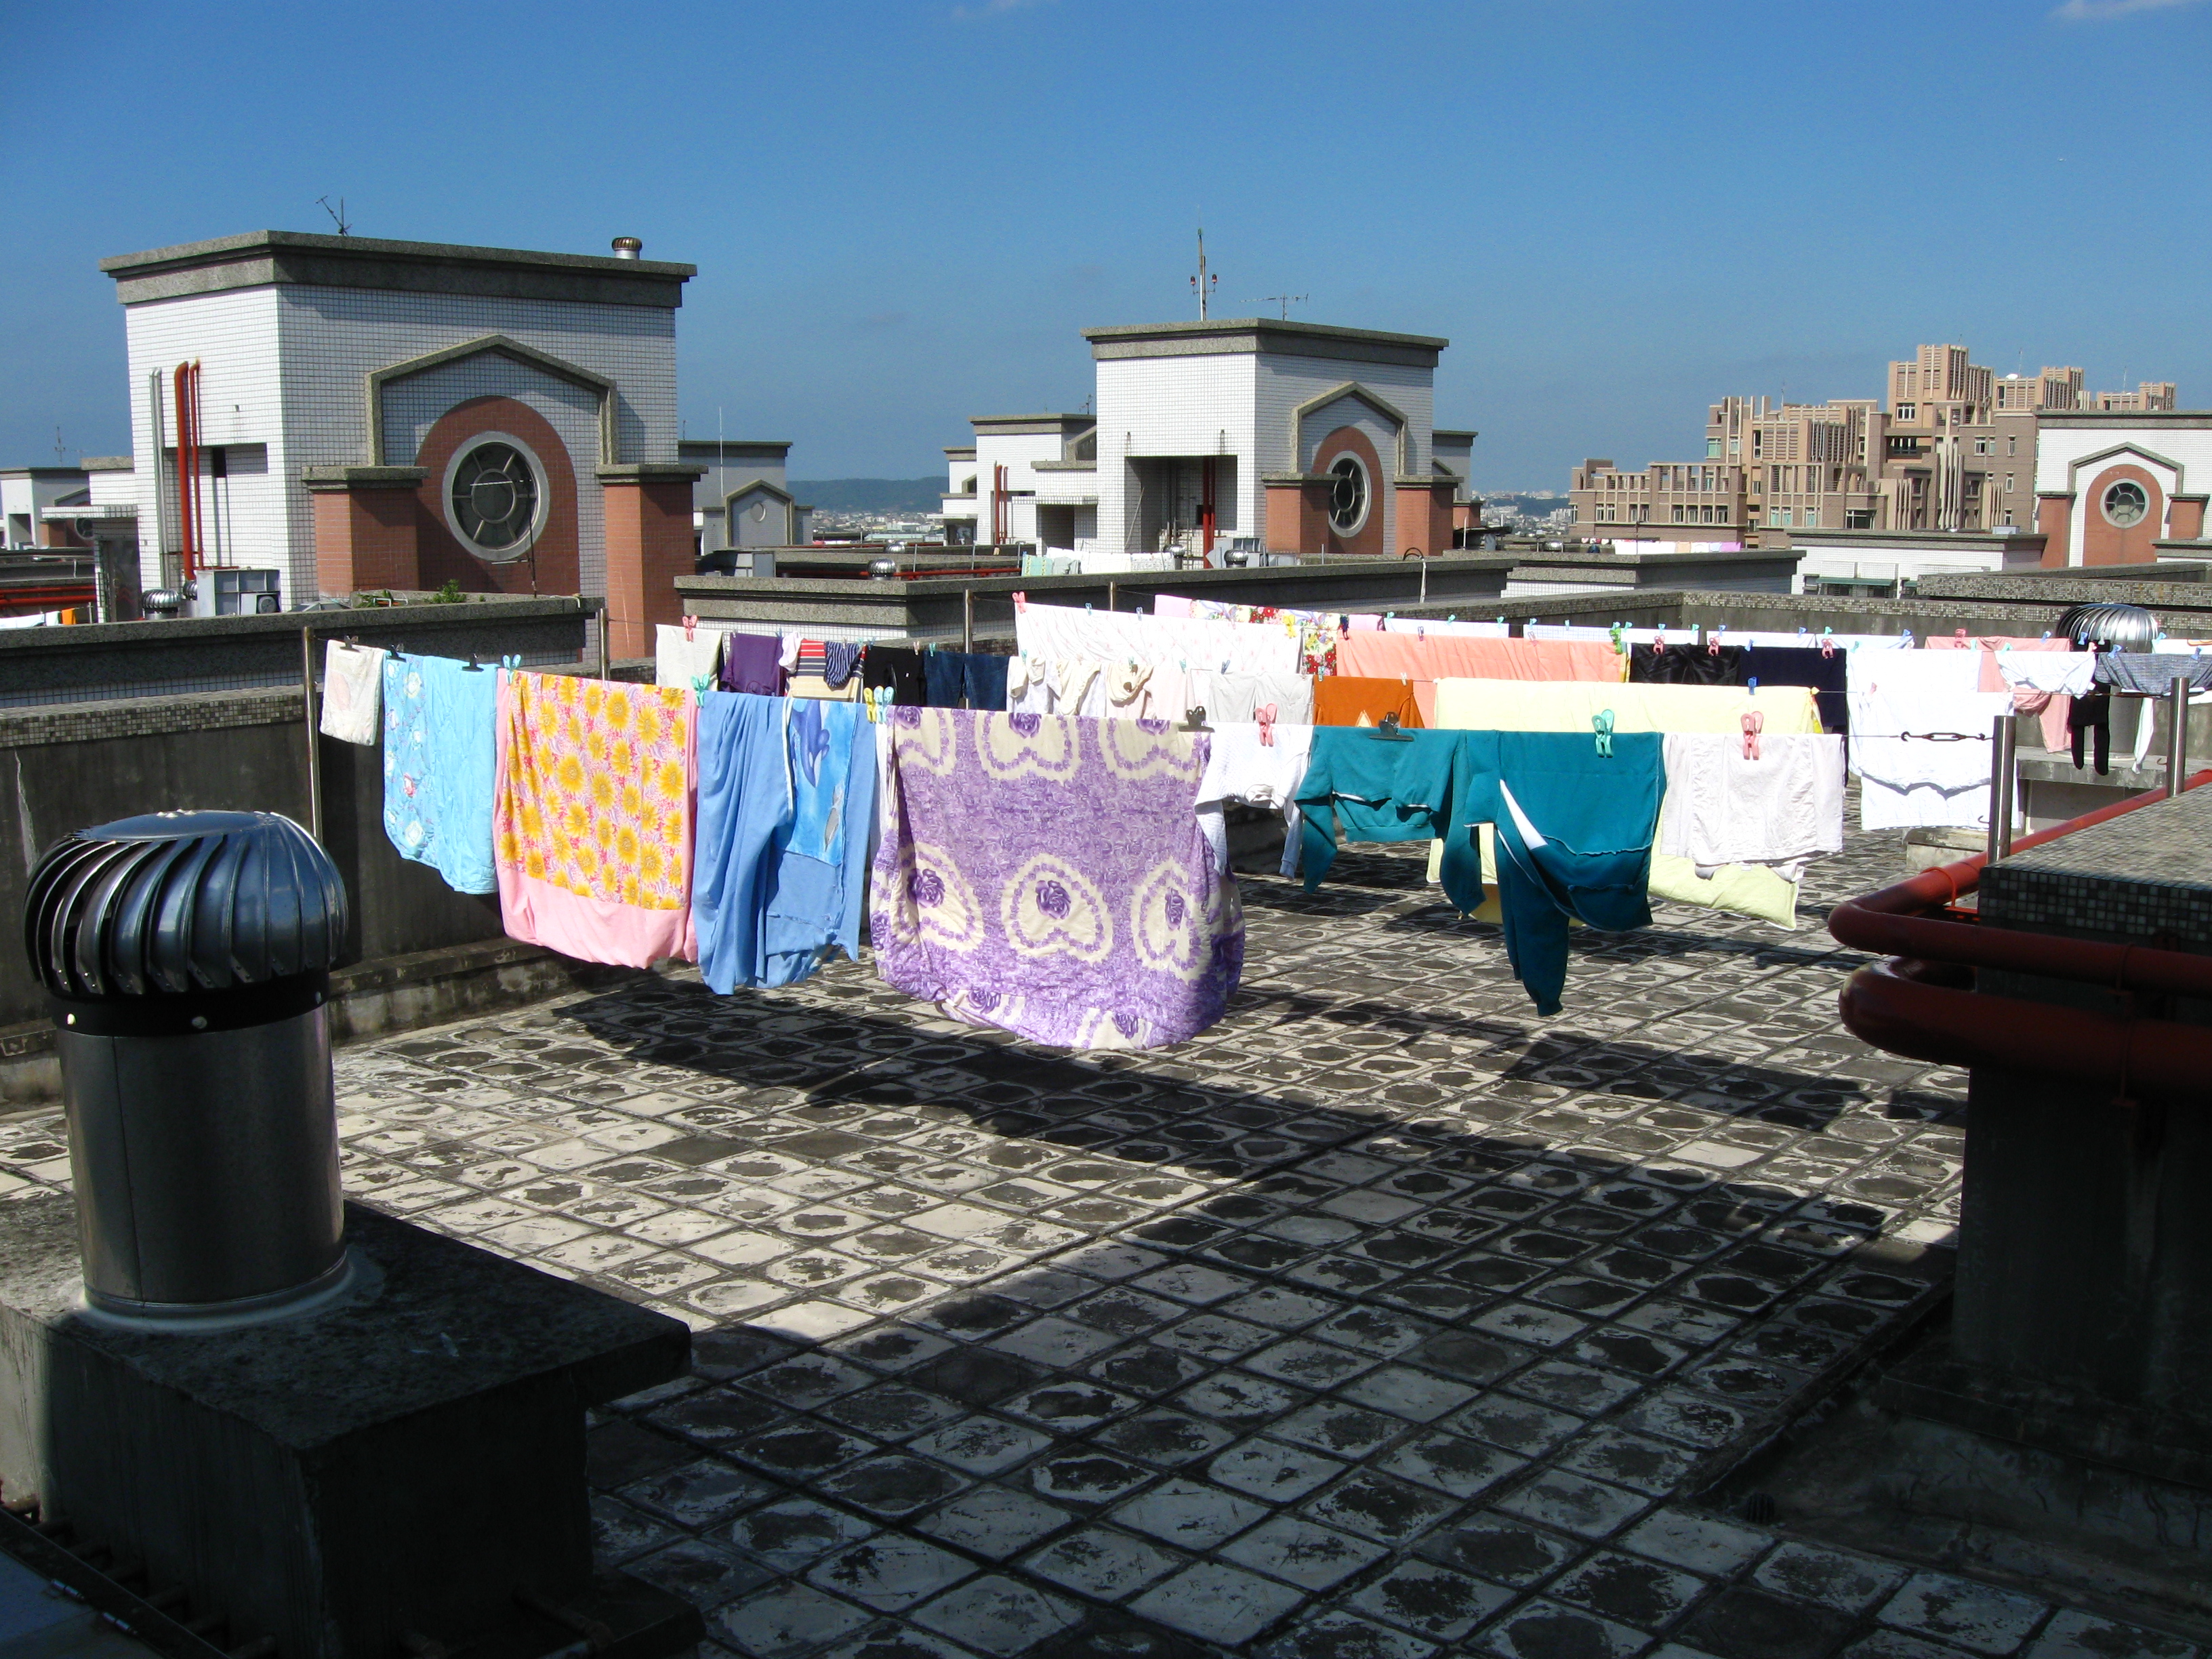 Laundry drying in sunlight photo